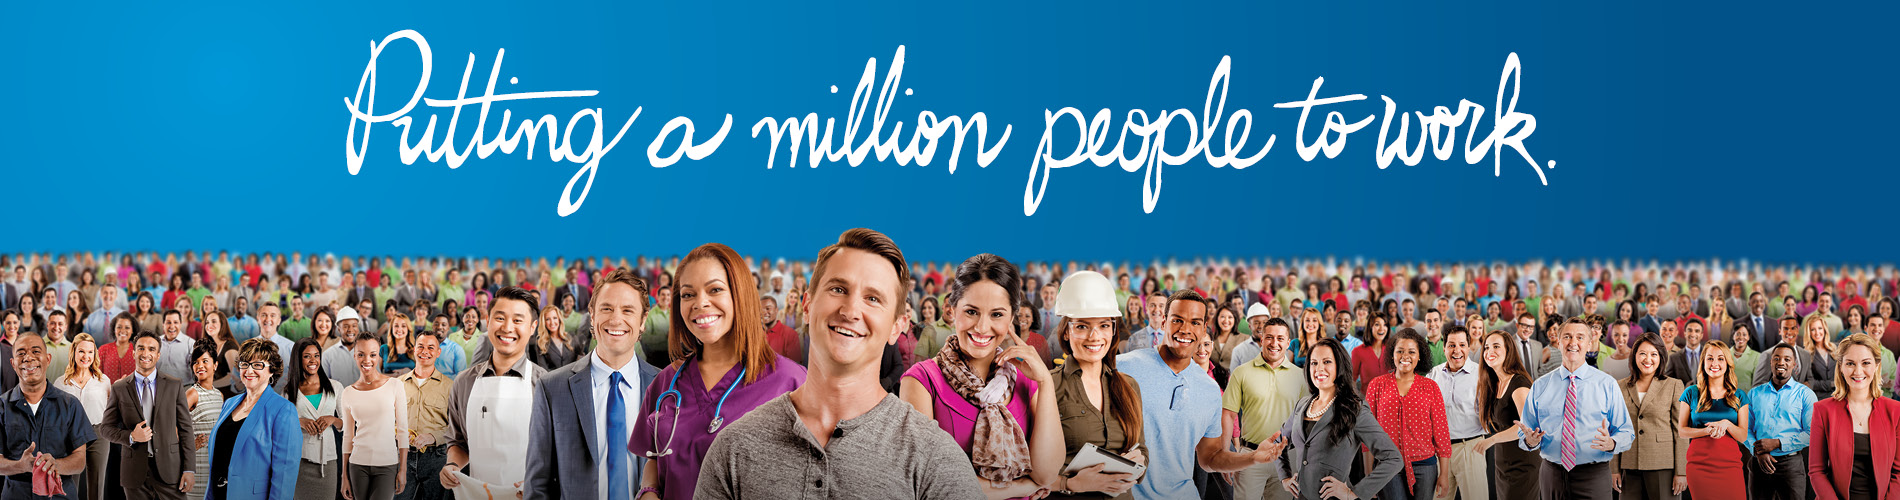 Putting A Million People To Work - 3 - Front Page Banner